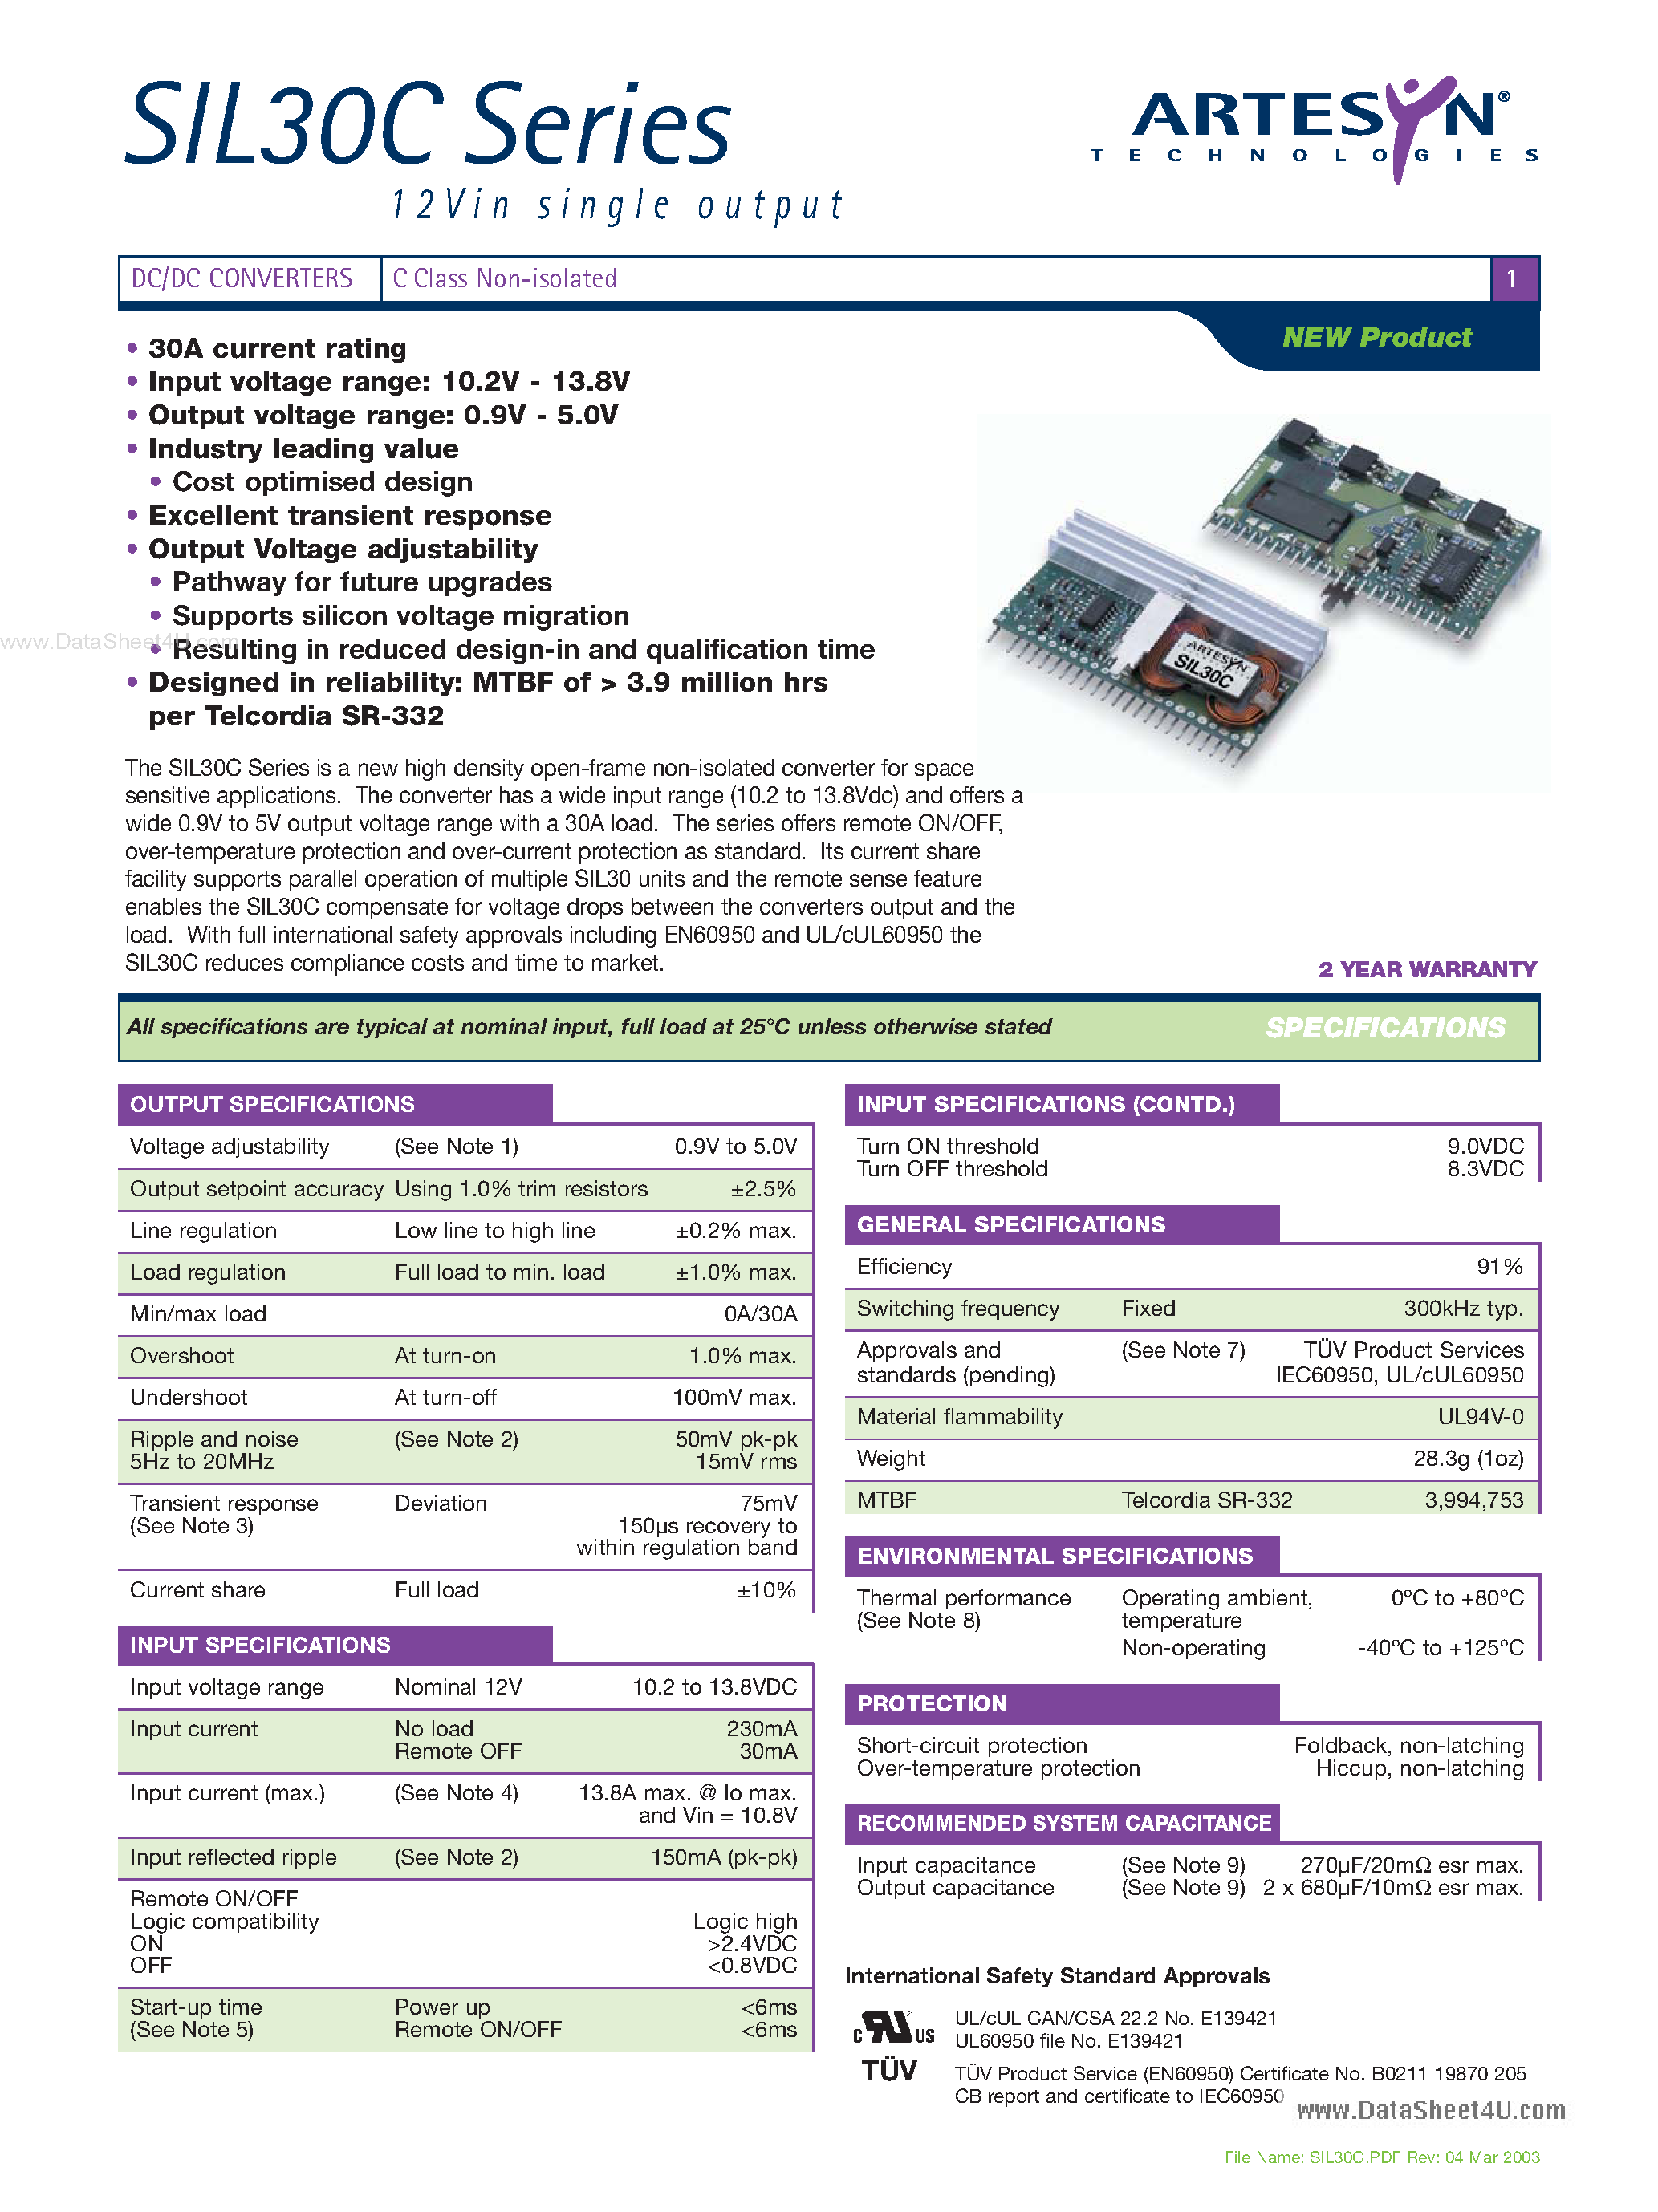 Datasheet SIL30C - DC/DC CONVERTERS C Class Non-isolated page 1